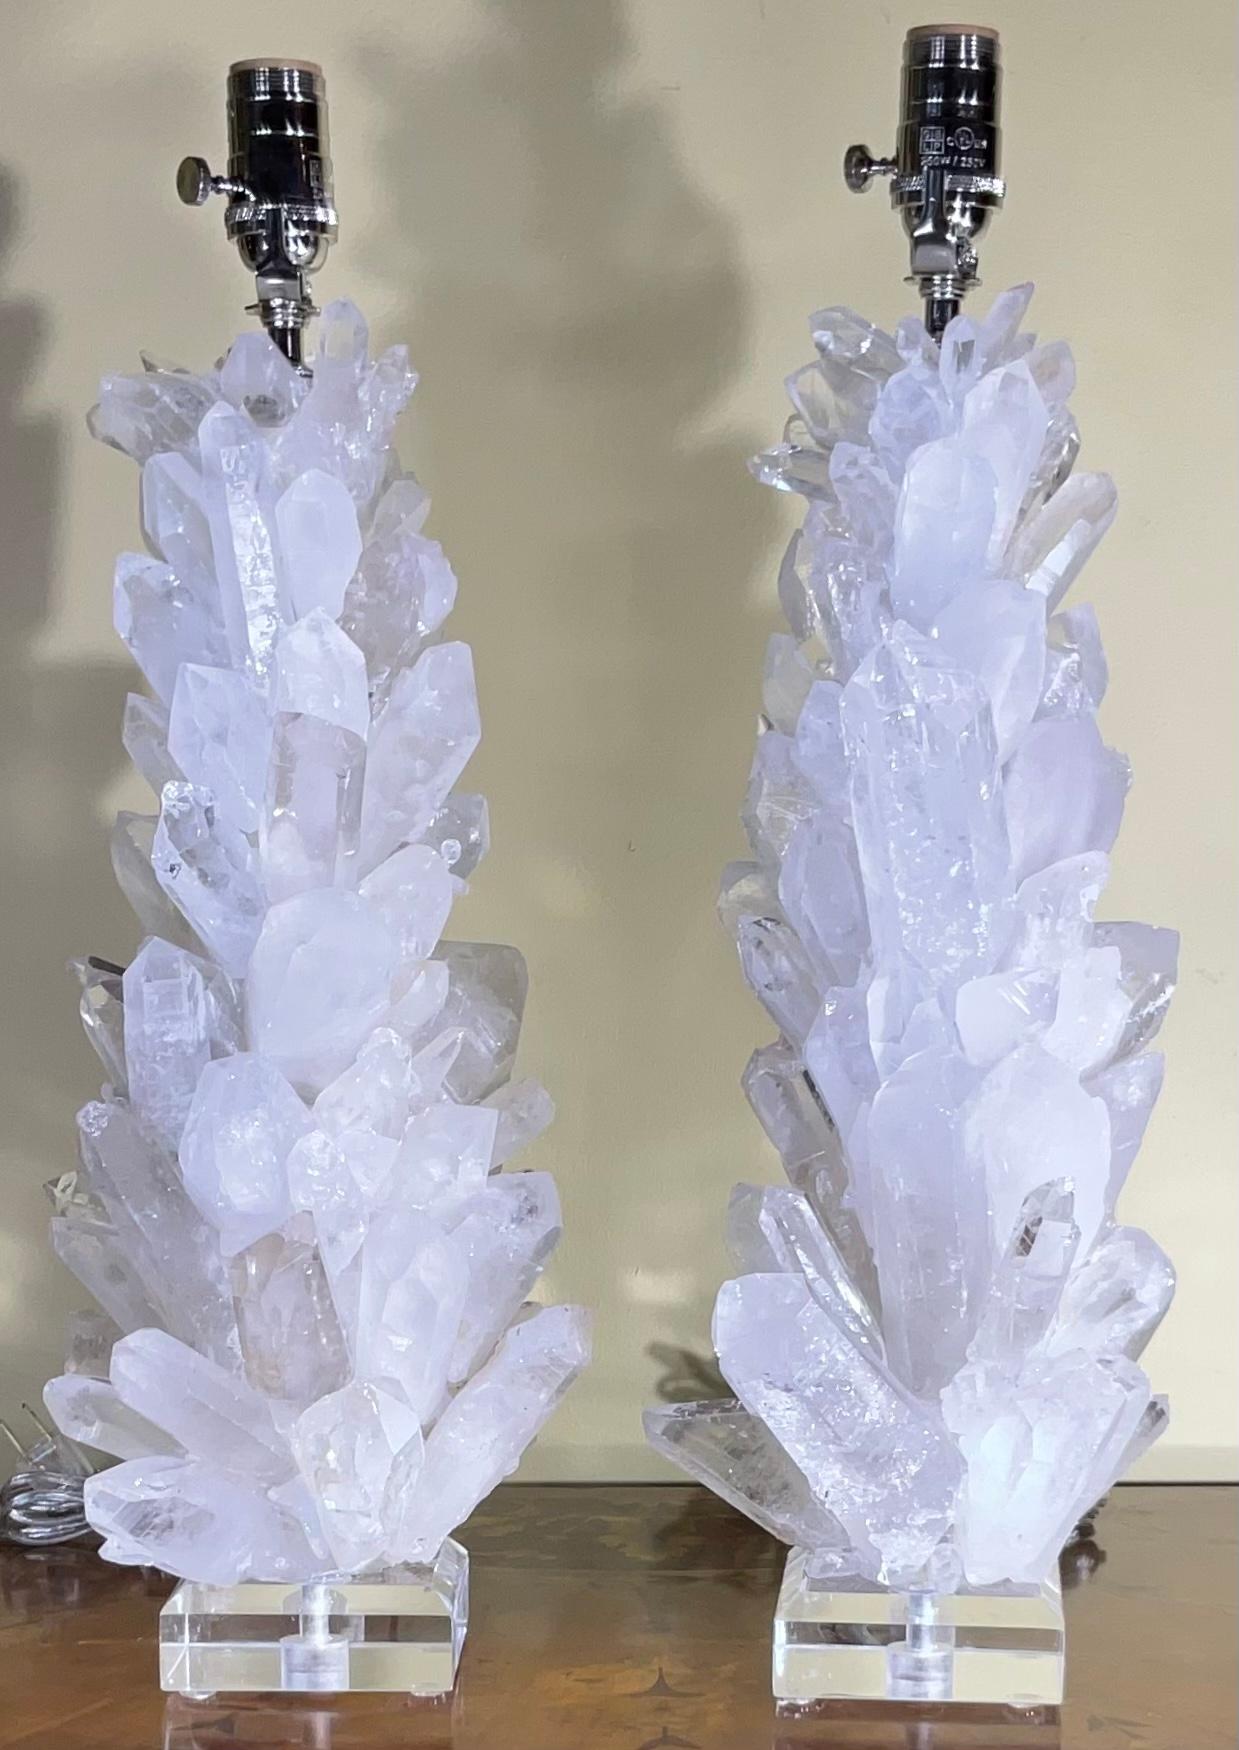 Pair of White Quartz Crystal Table Lamps by Joseph Malekan For Sale 2